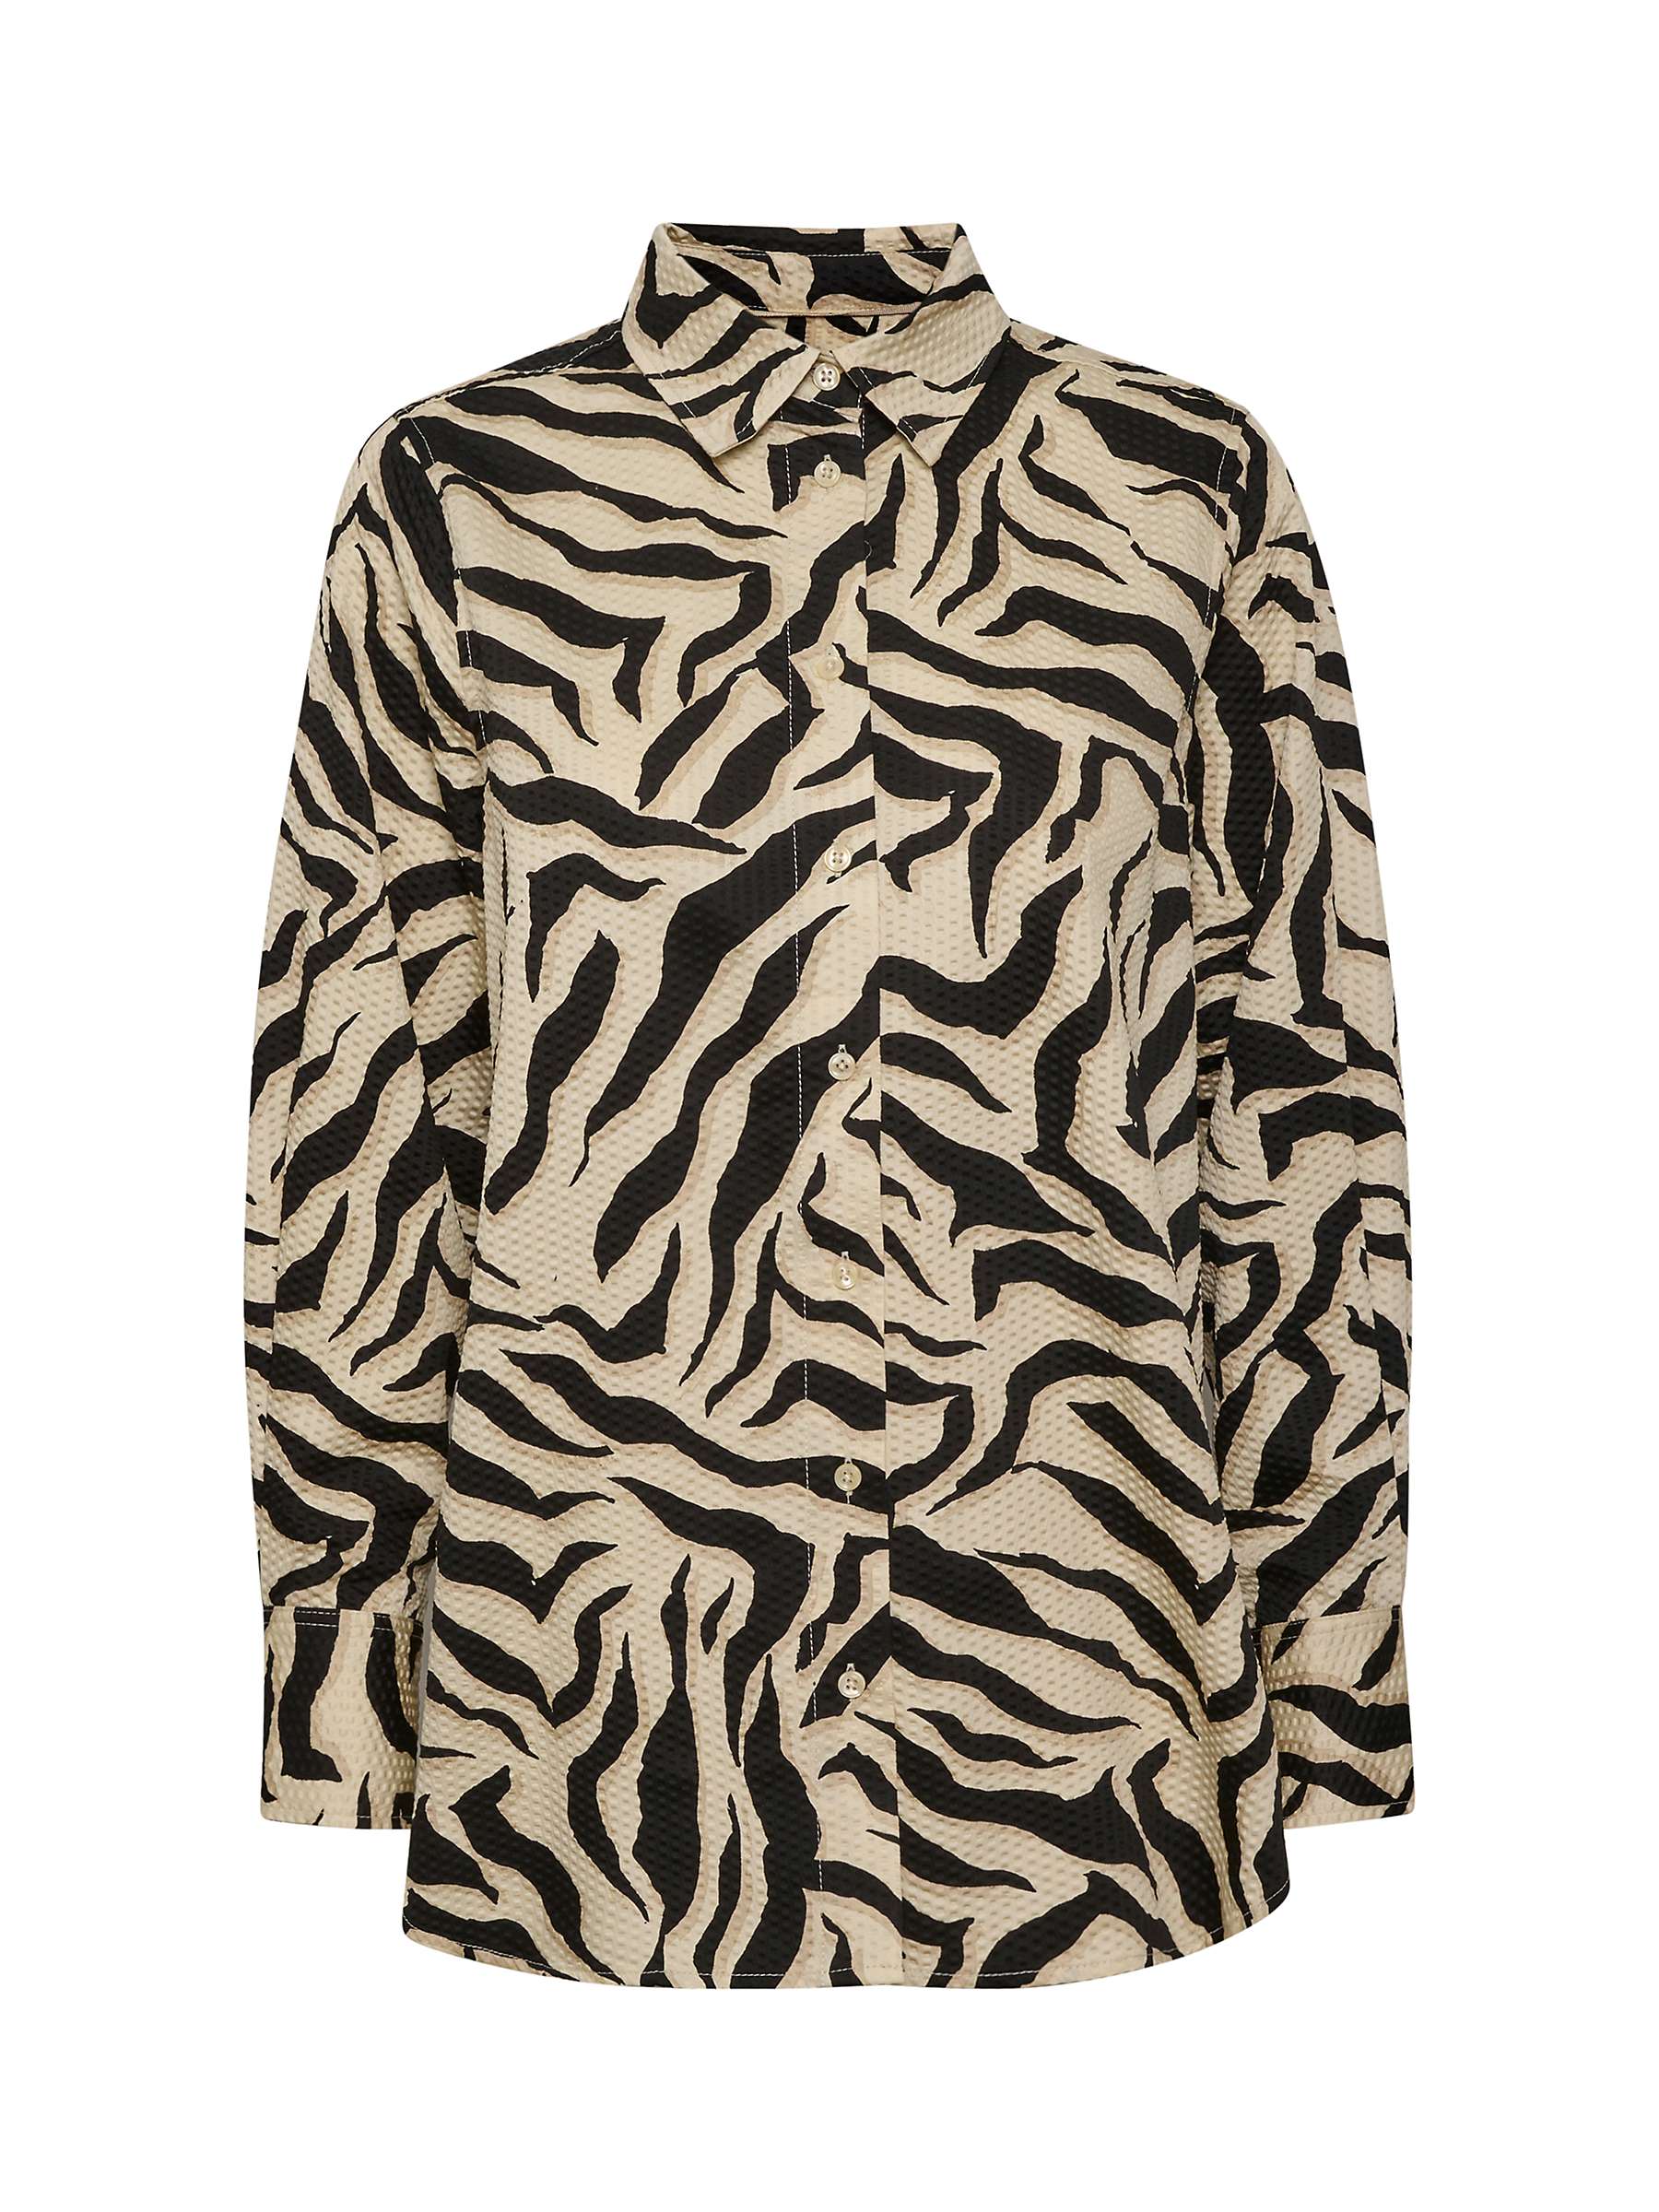 Buy Part Two Varla Relaxed Fit Shirt, Zebra Print Online at johnlewis.com